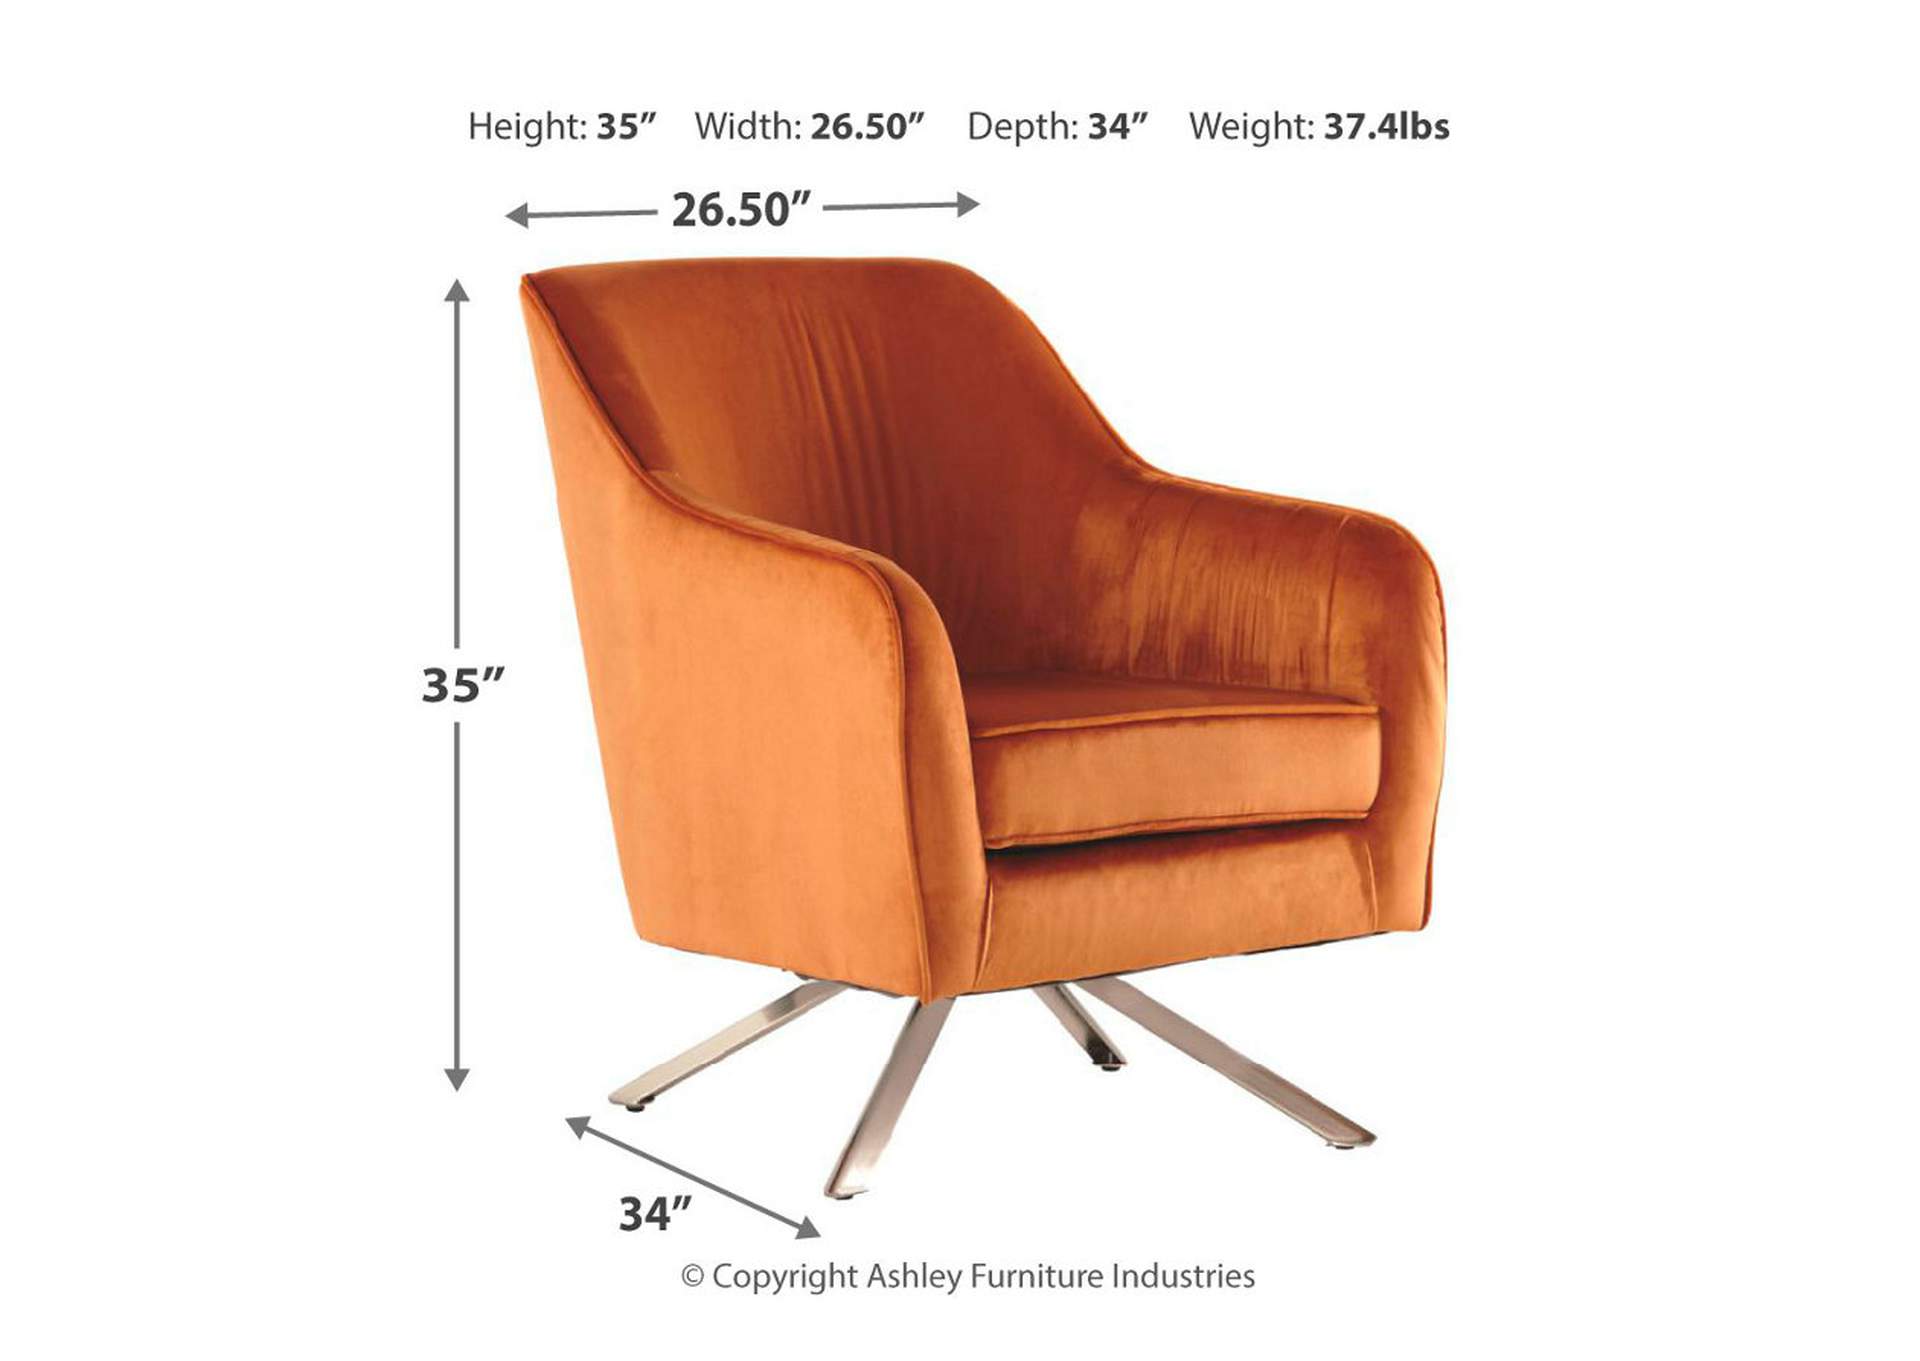 Hangar Accent Chair,Signature Design By Ashley